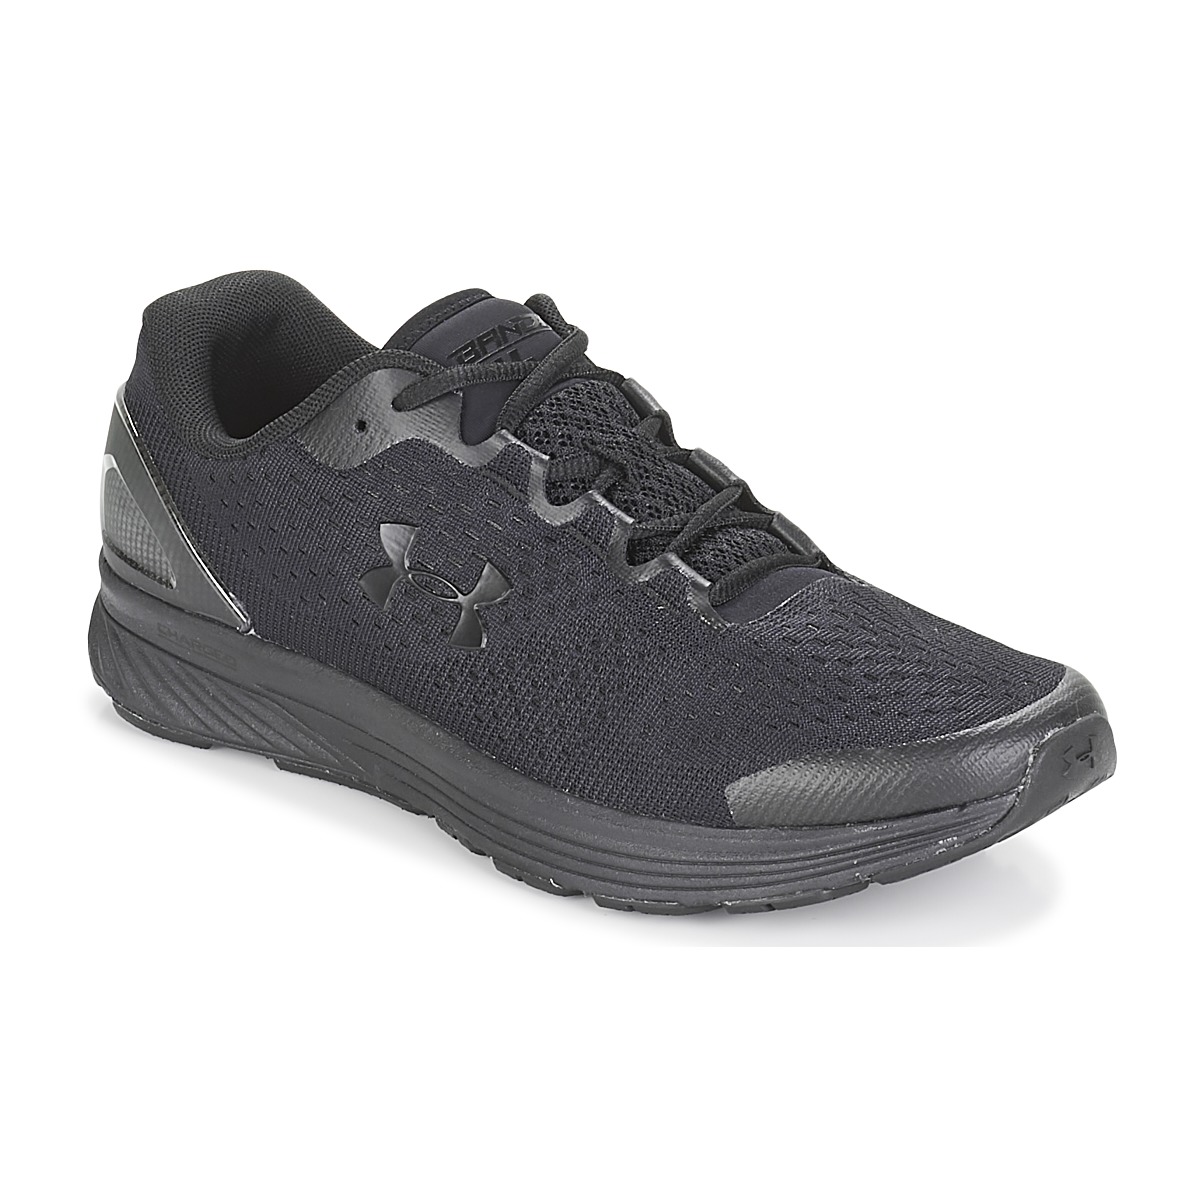 Under Armour Ua Charged Bandit 4 Black